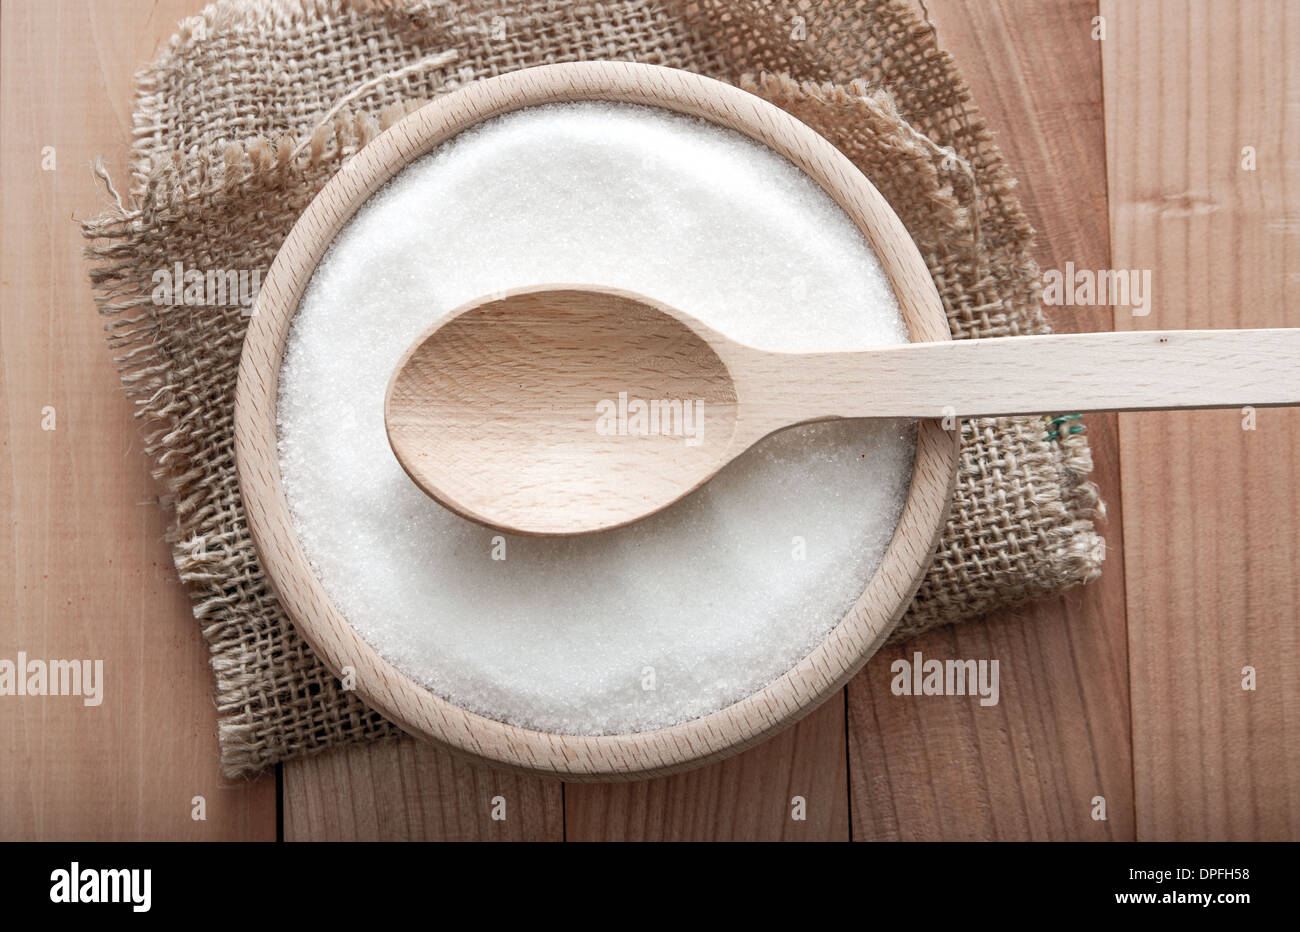 sugar in a wooden bowl on wooden table, close up Stock Photo